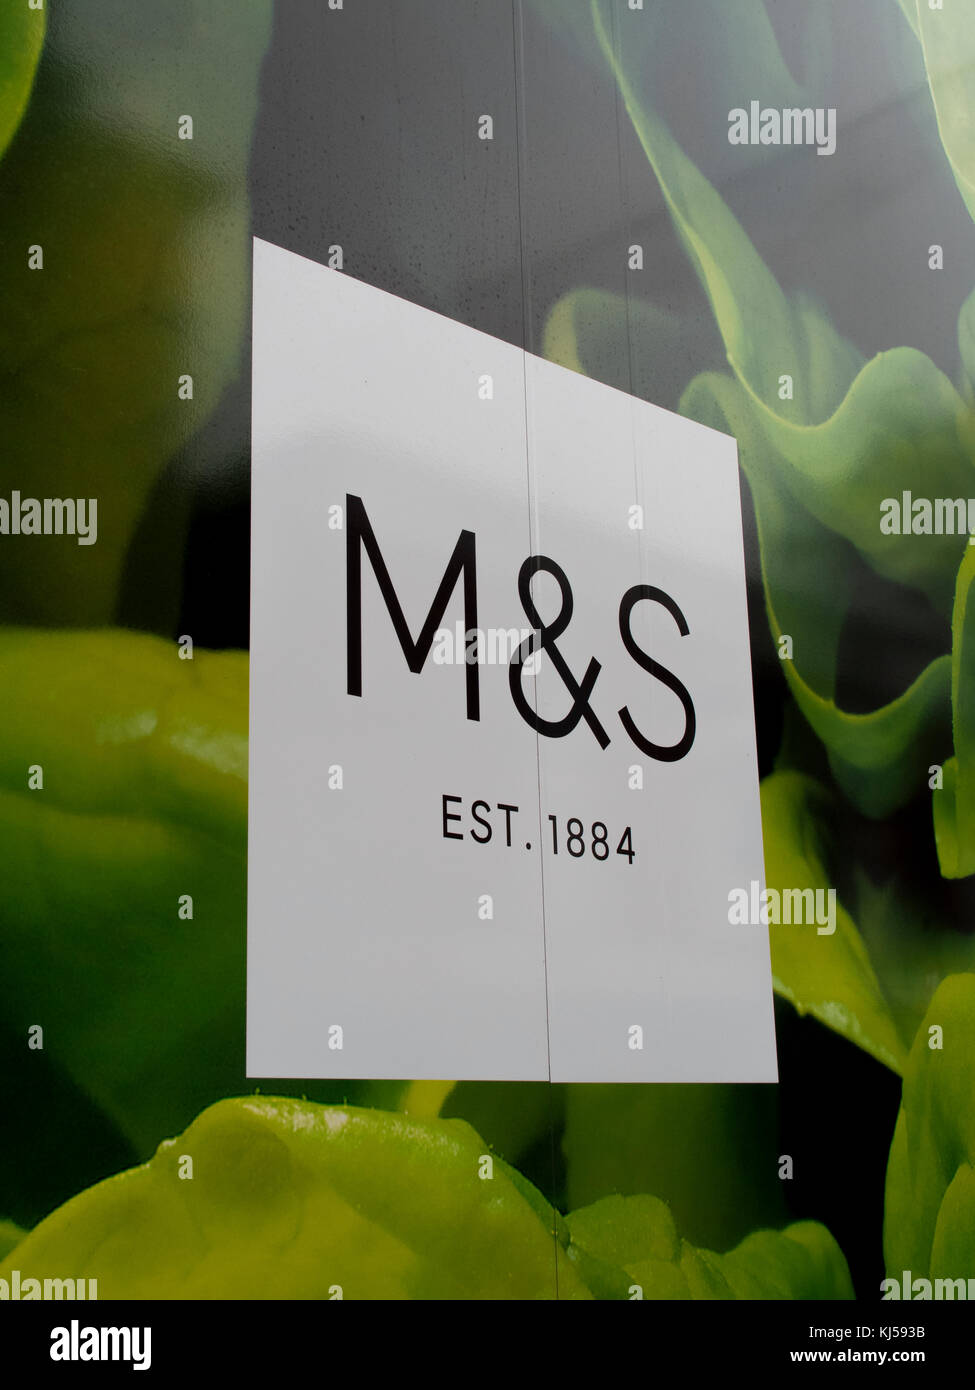 Marks and Spenser window display, company founded in 1884 by Michael Marks and Thomas Spenser Stock Photo